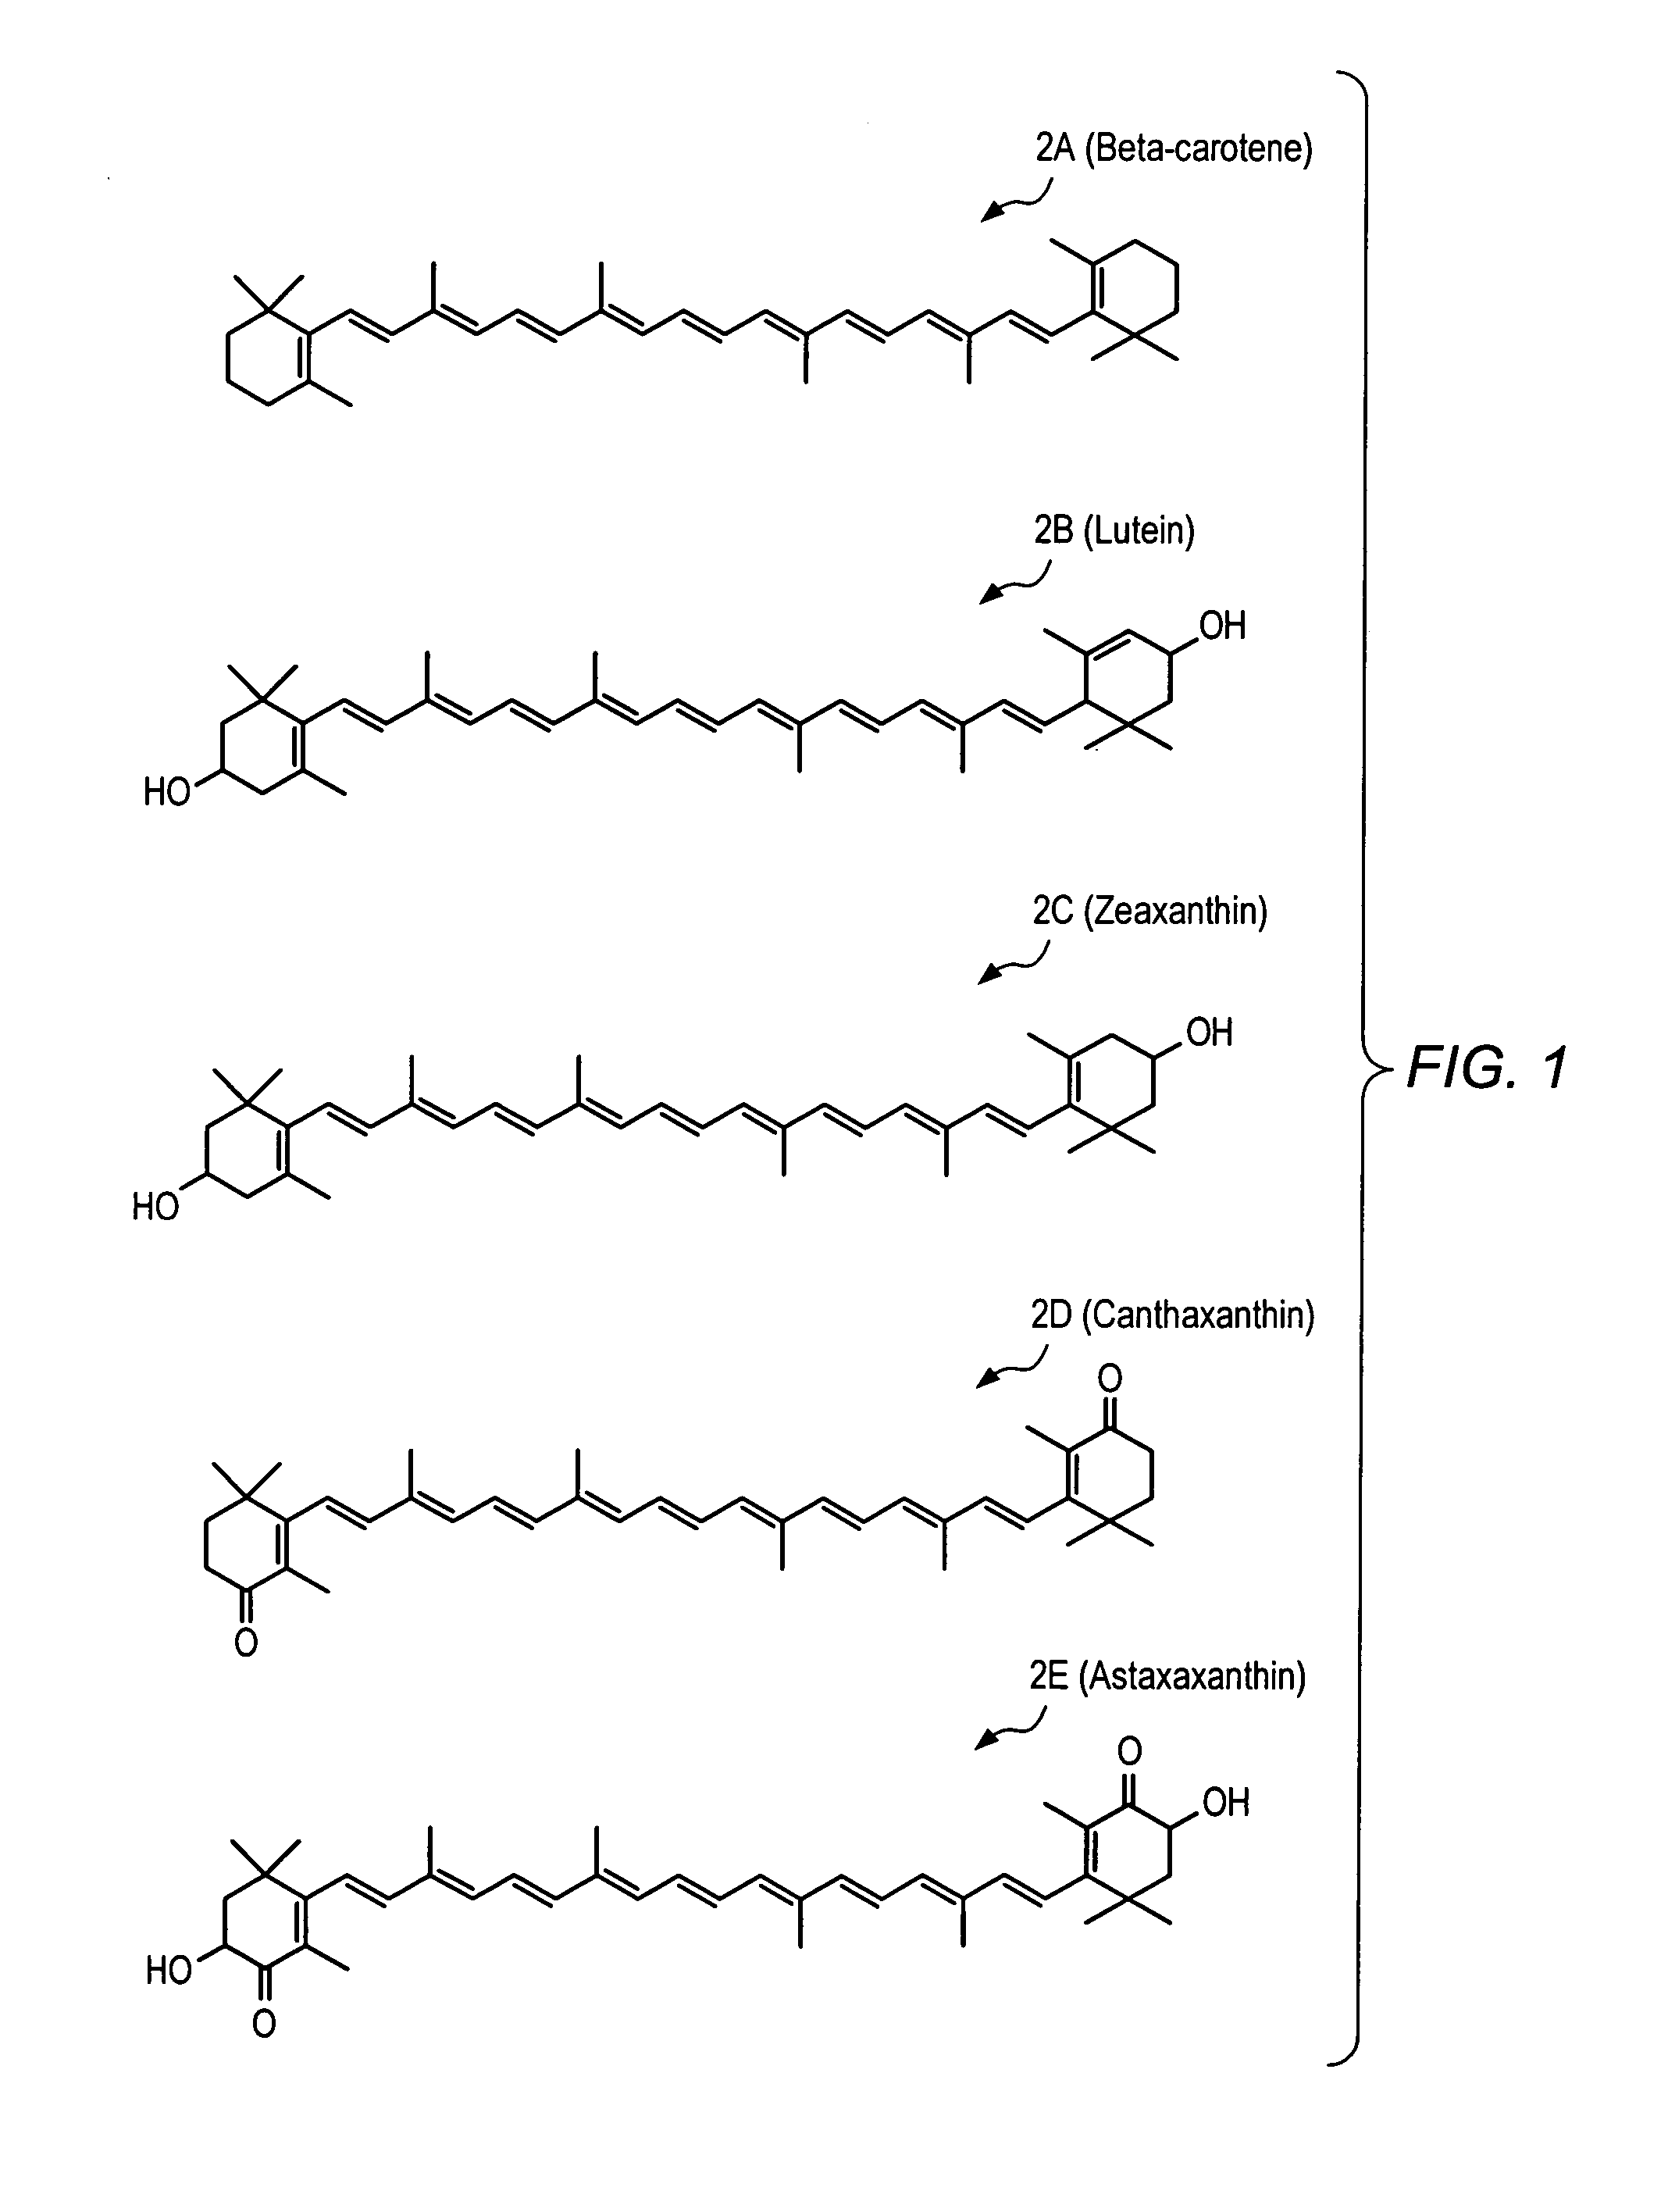 Pharmaceutical compositions including carotenoid ester analogs or derivatives for the inhibition and amelioration of disease